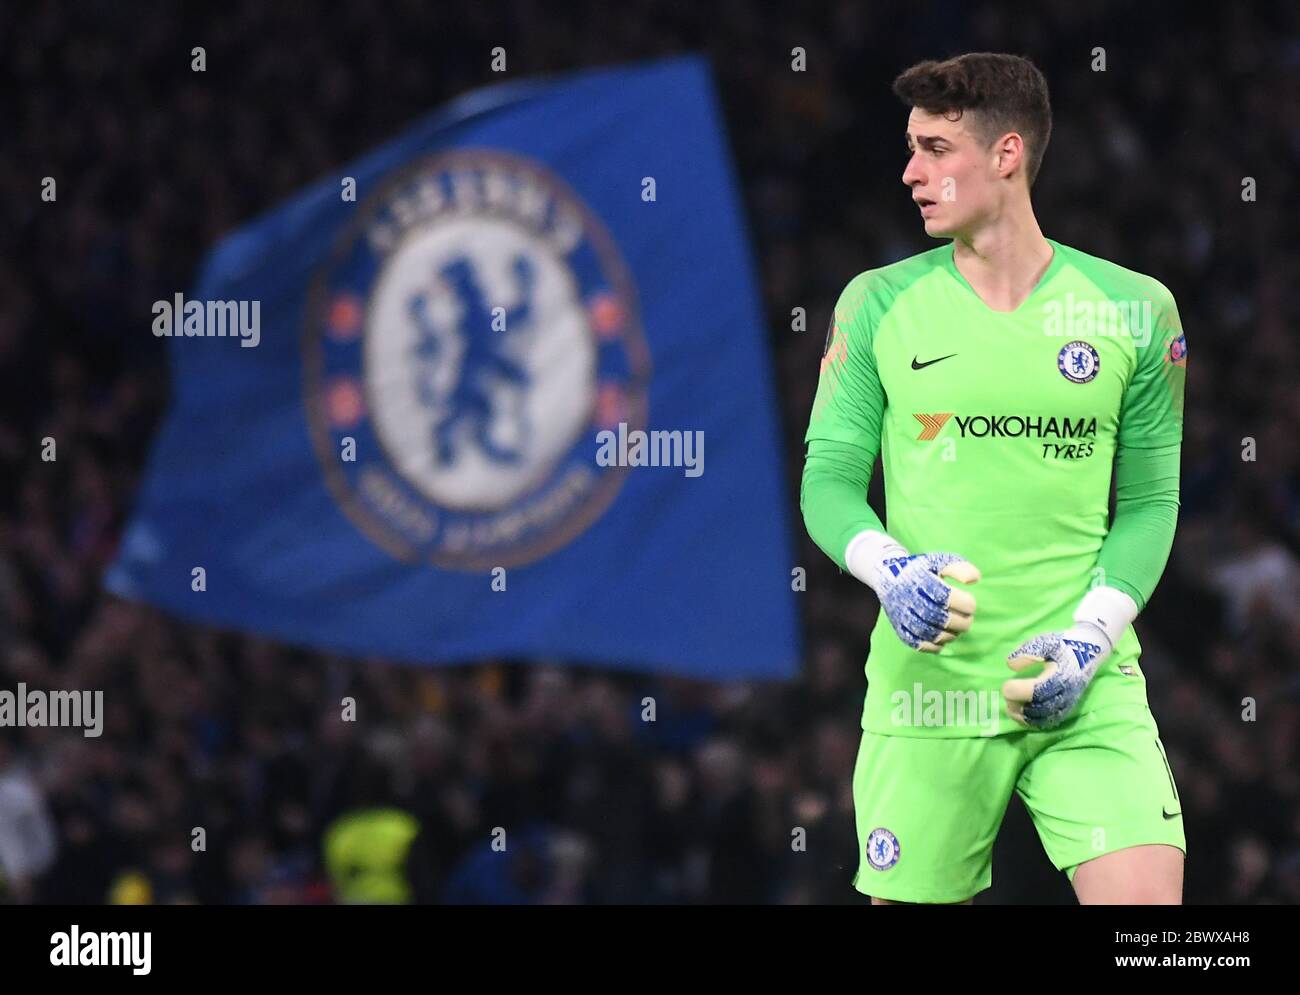 LONDON, ENGLAND - APRIL 18, 2019: Kepa Arrizabalaga of Chelsea pictured during the second leg of the 2018/19 UEFA Europa League Quarter-Finals game between Chelsea FC (England) and SK Slavia Praha (Czech Republic) at Stamford Bridge. Stock Photo